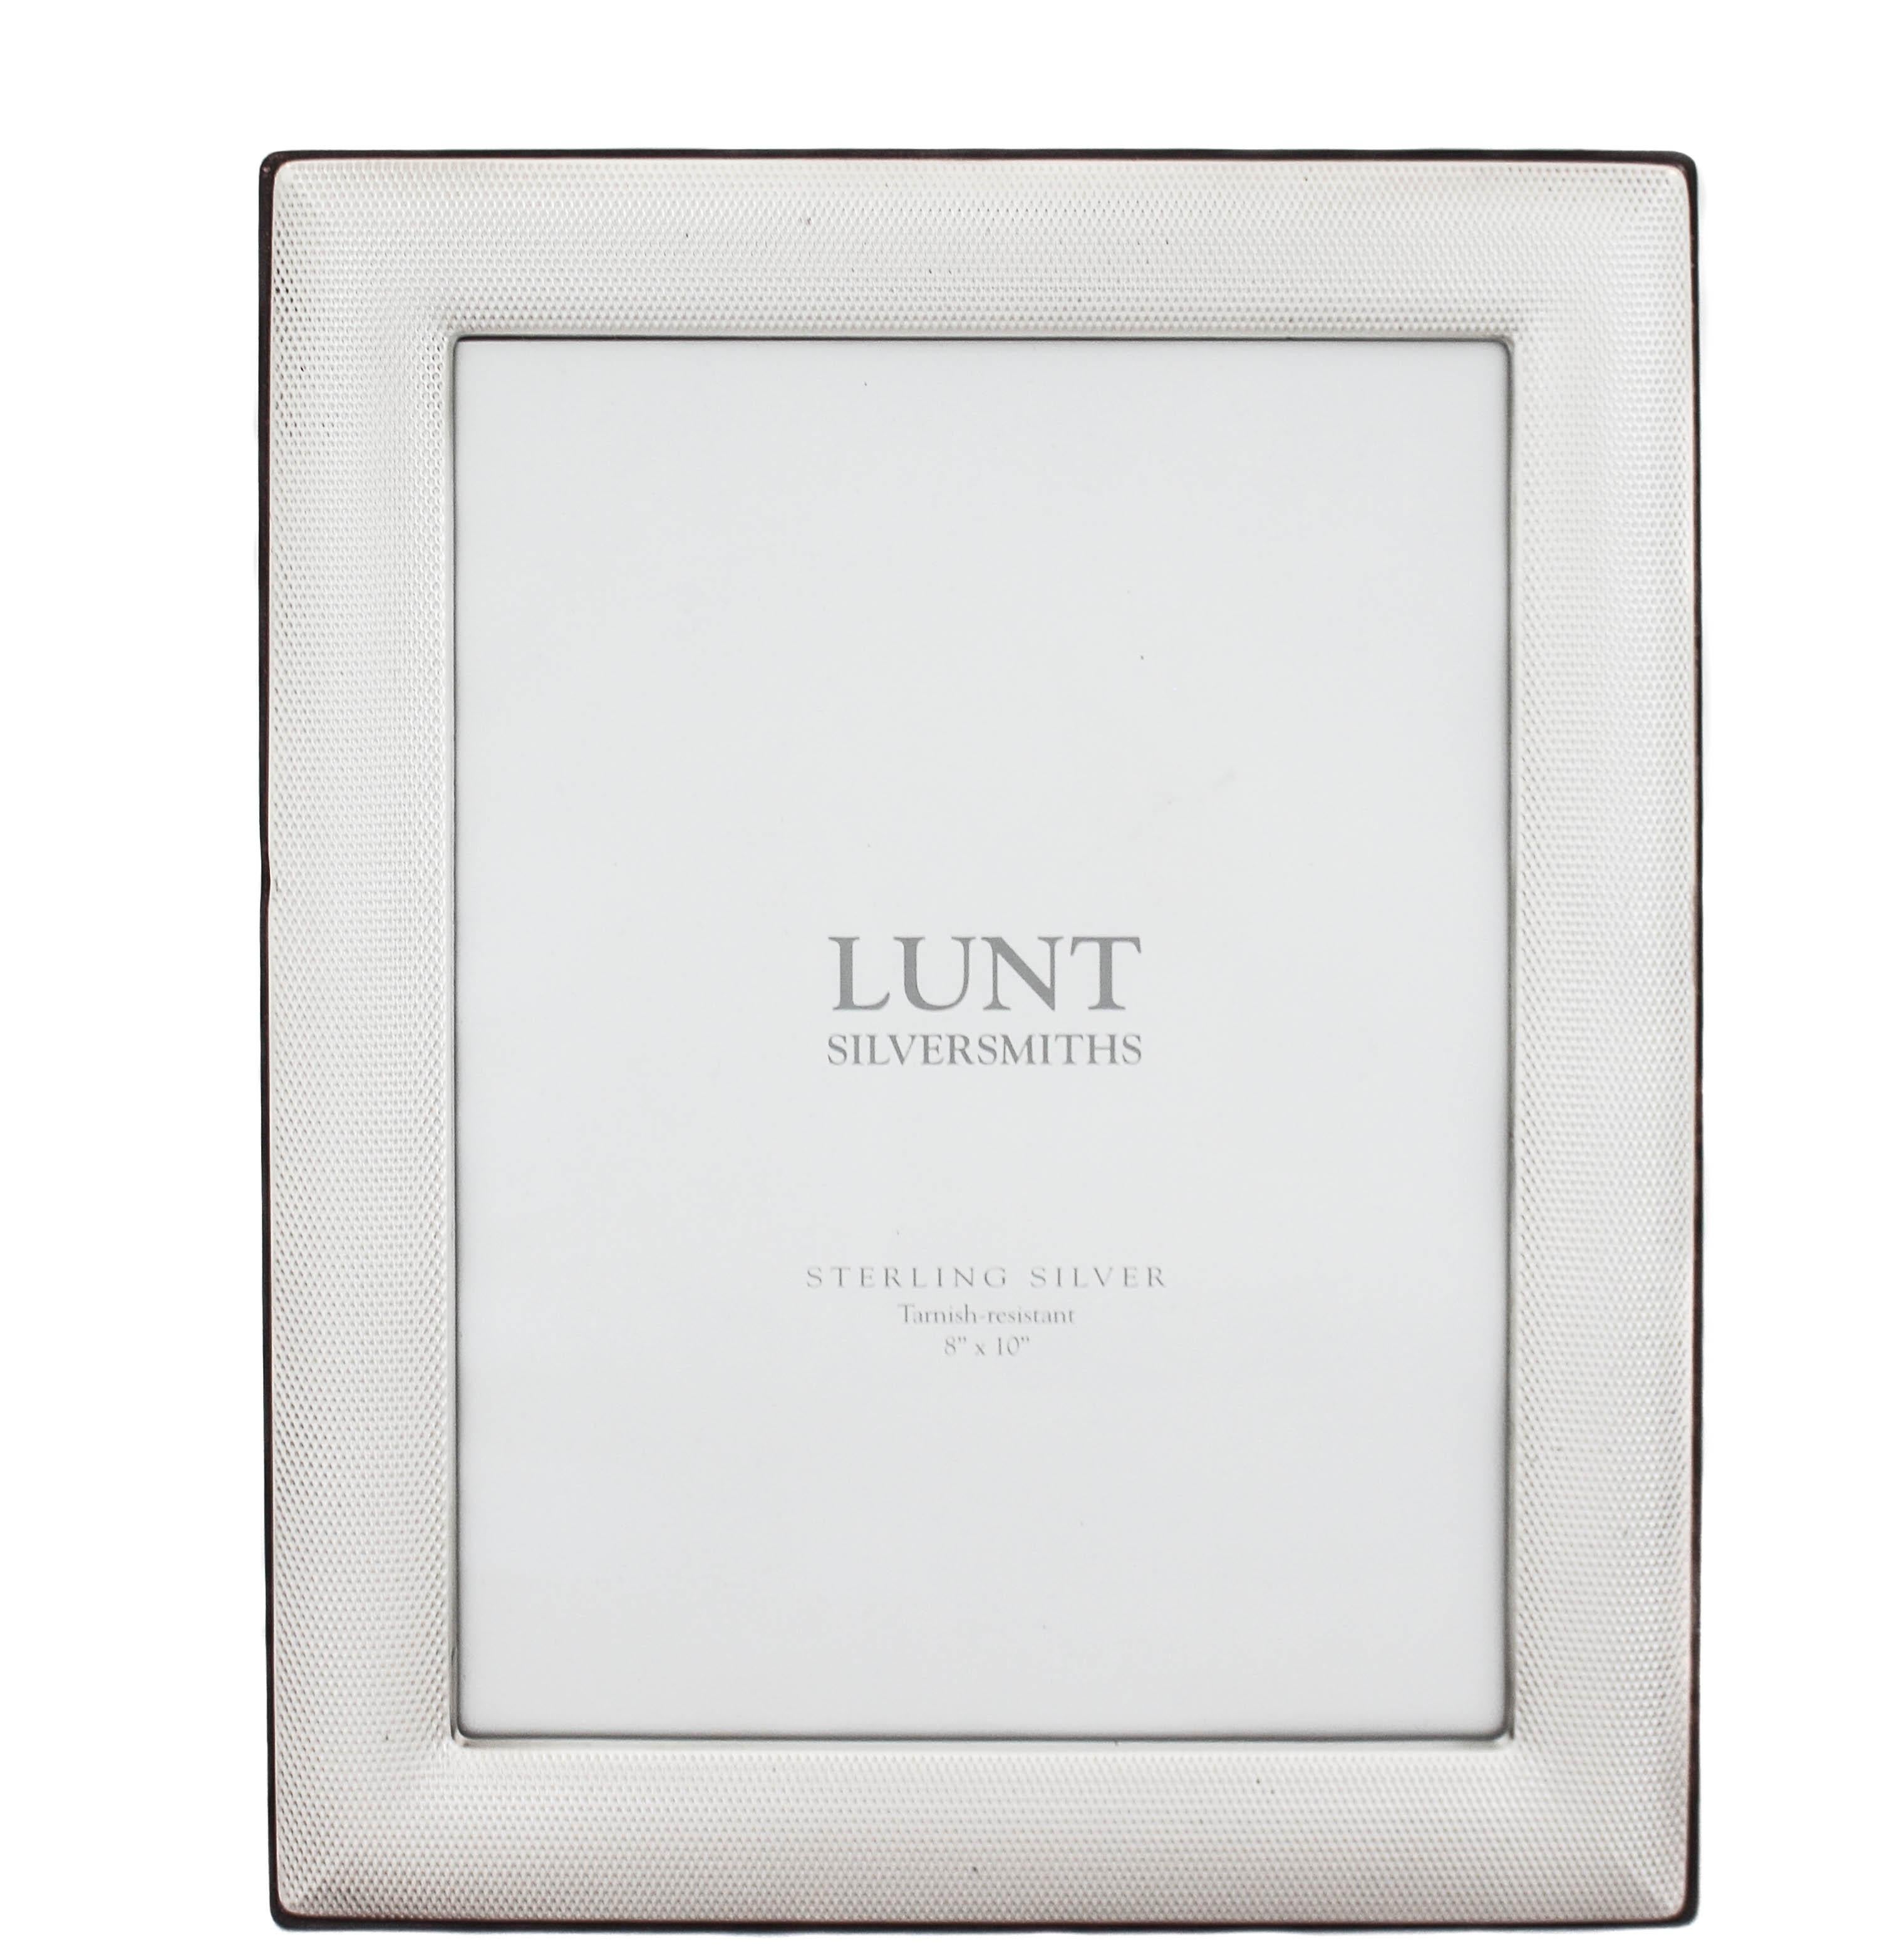 We are offering a new sterling silver picture frame by Lunt Silversmiths. Manufactured in Italy, it is tarnish resistant and has a wood back. The sterling silver front has a python pattern (texture) that is universal and works in any decor.